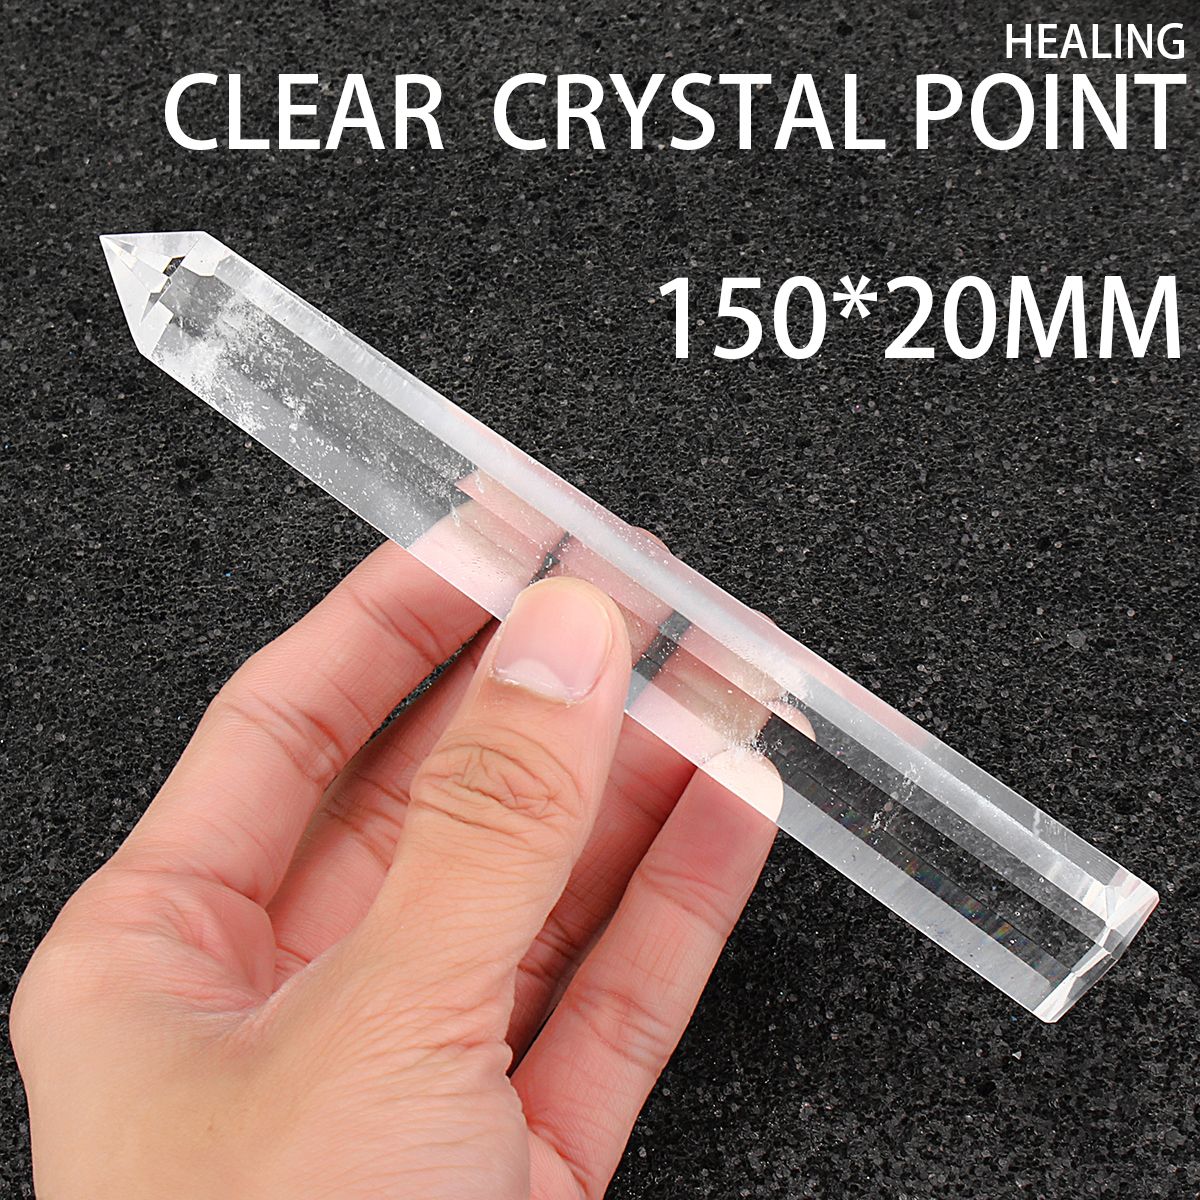 50g-100-Natural-Clear-Quartz-Crystal-Point-Specimen-Healing-Rock-Stone-150mm-Home-Decorations-Gift-1402433